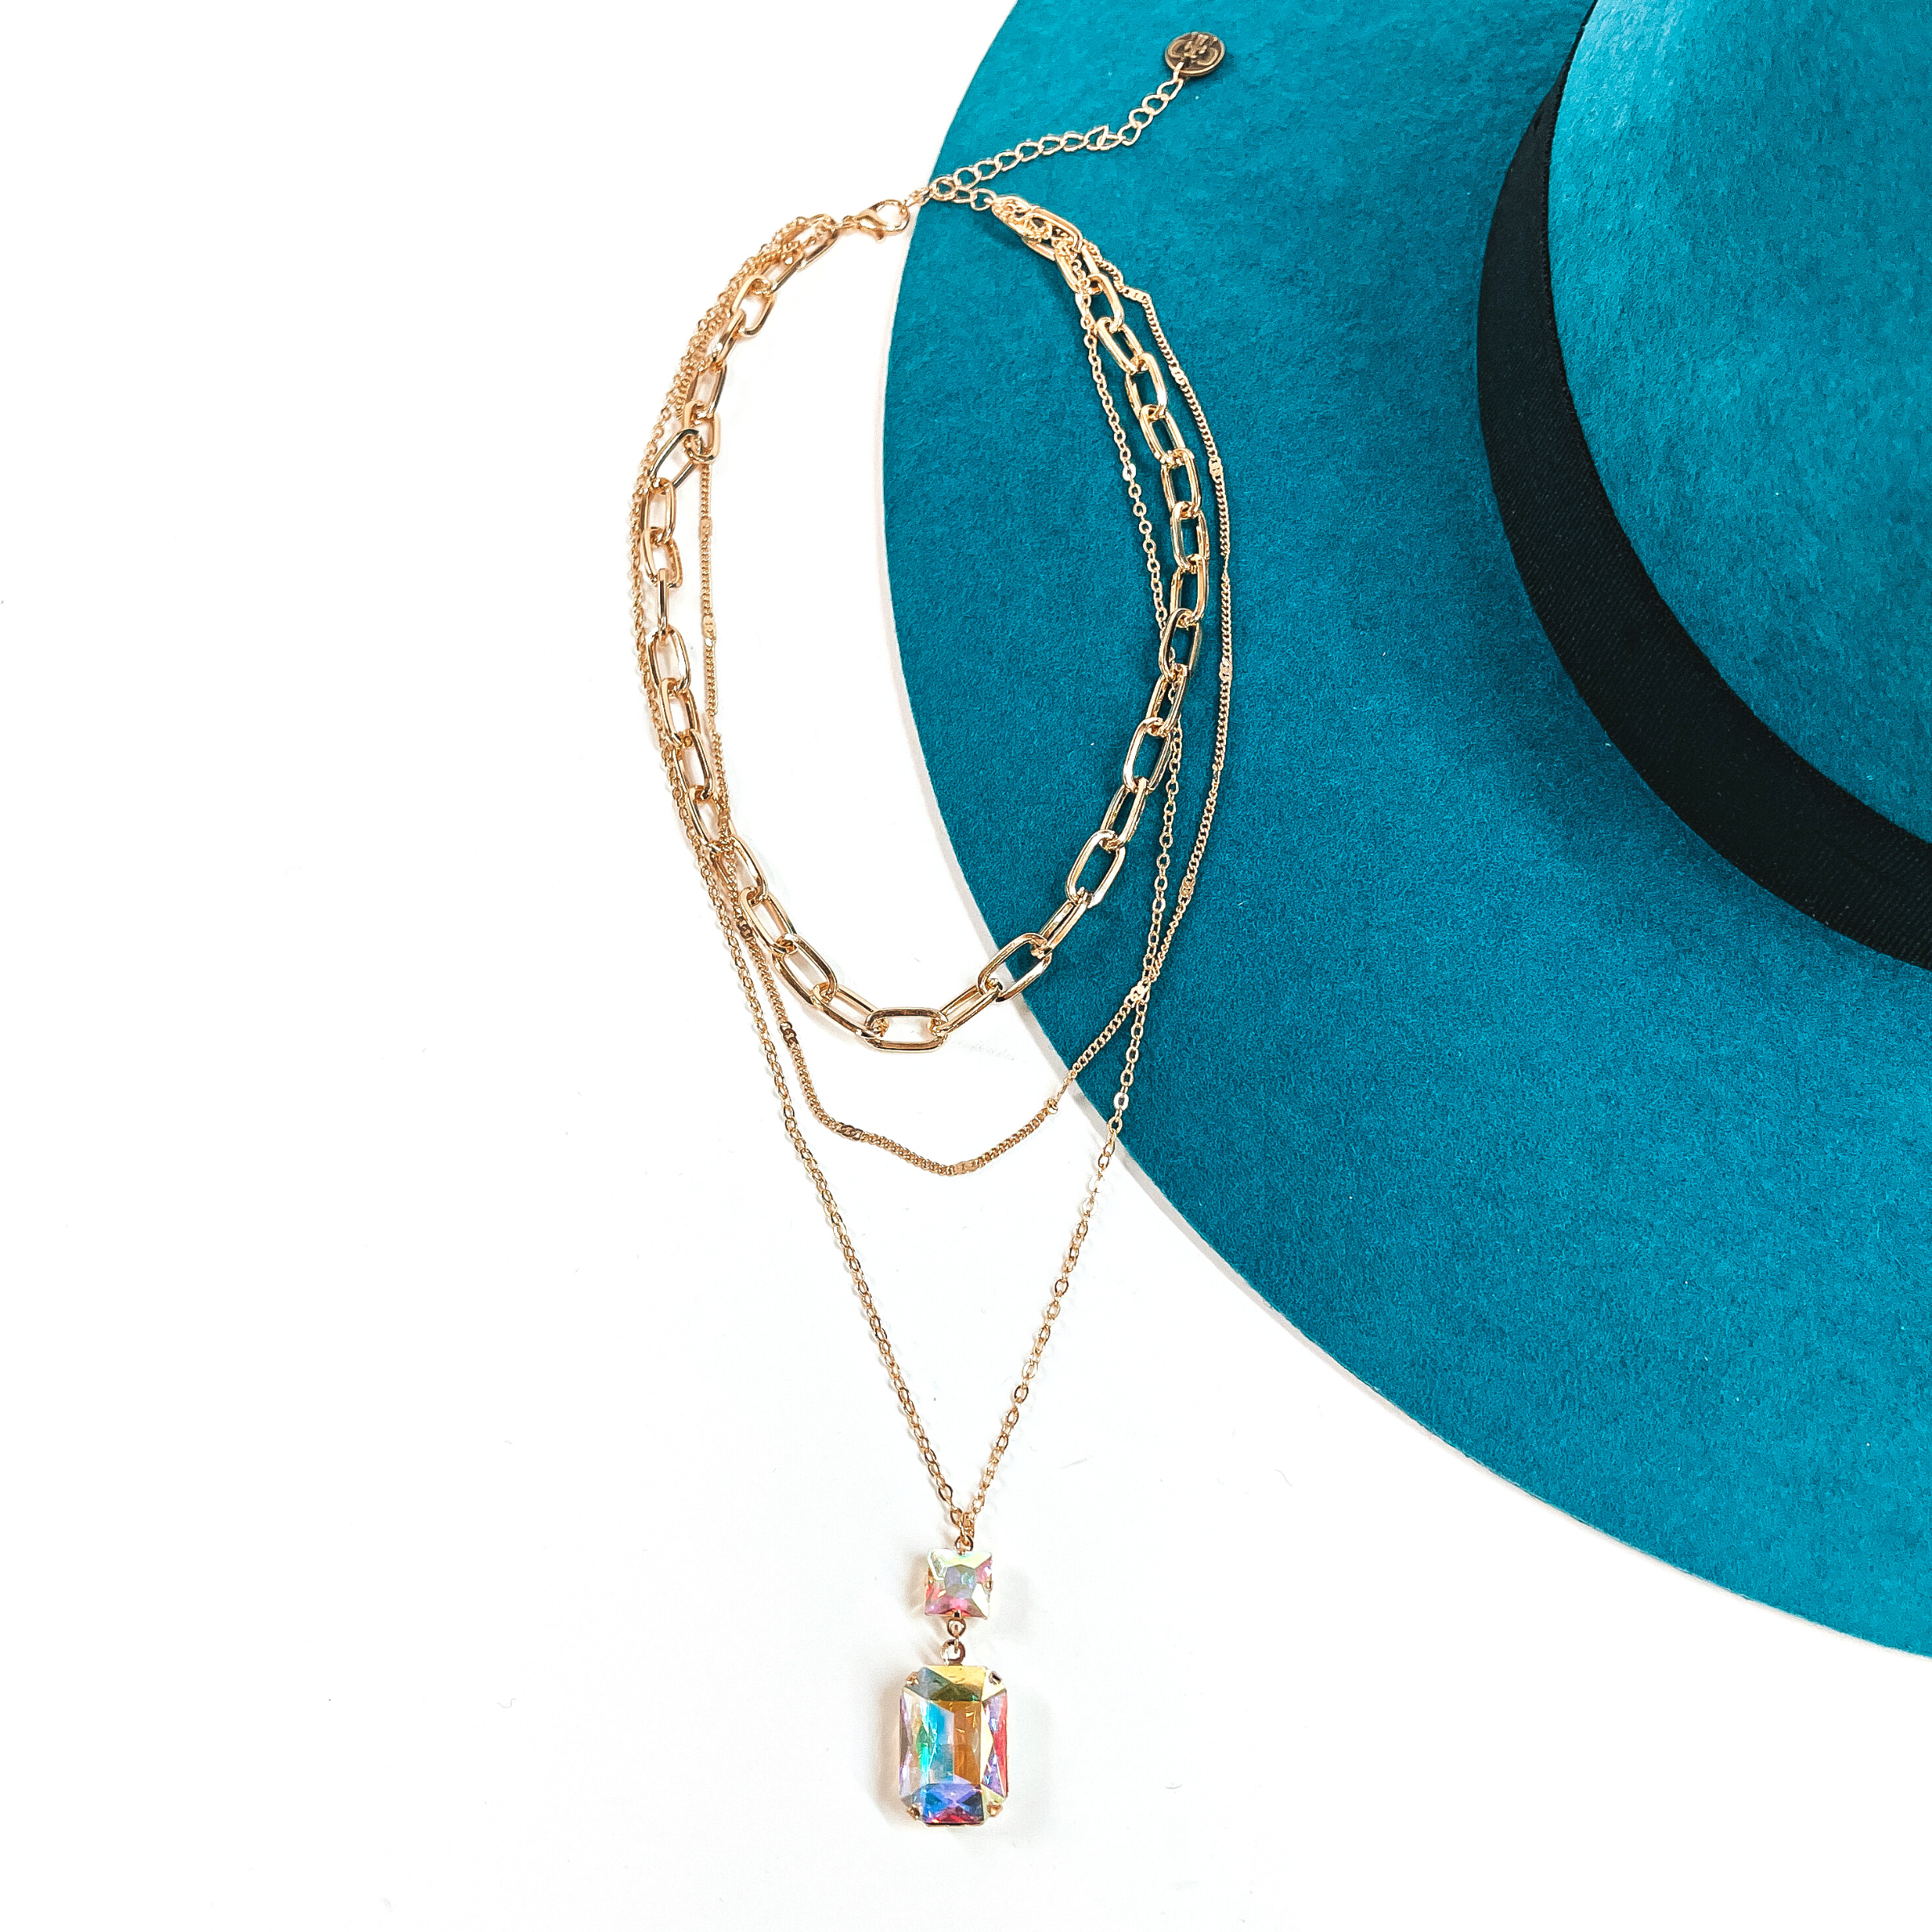 This is a three strand gold tone necklace with an AB crystal pendant. There are  two thin strands and one thick chain link strand. The longest strand has a small  square AB crystal connector and a rectangle AB crystal. This necklace is taken  on a teal felt hat brim and on a white background.